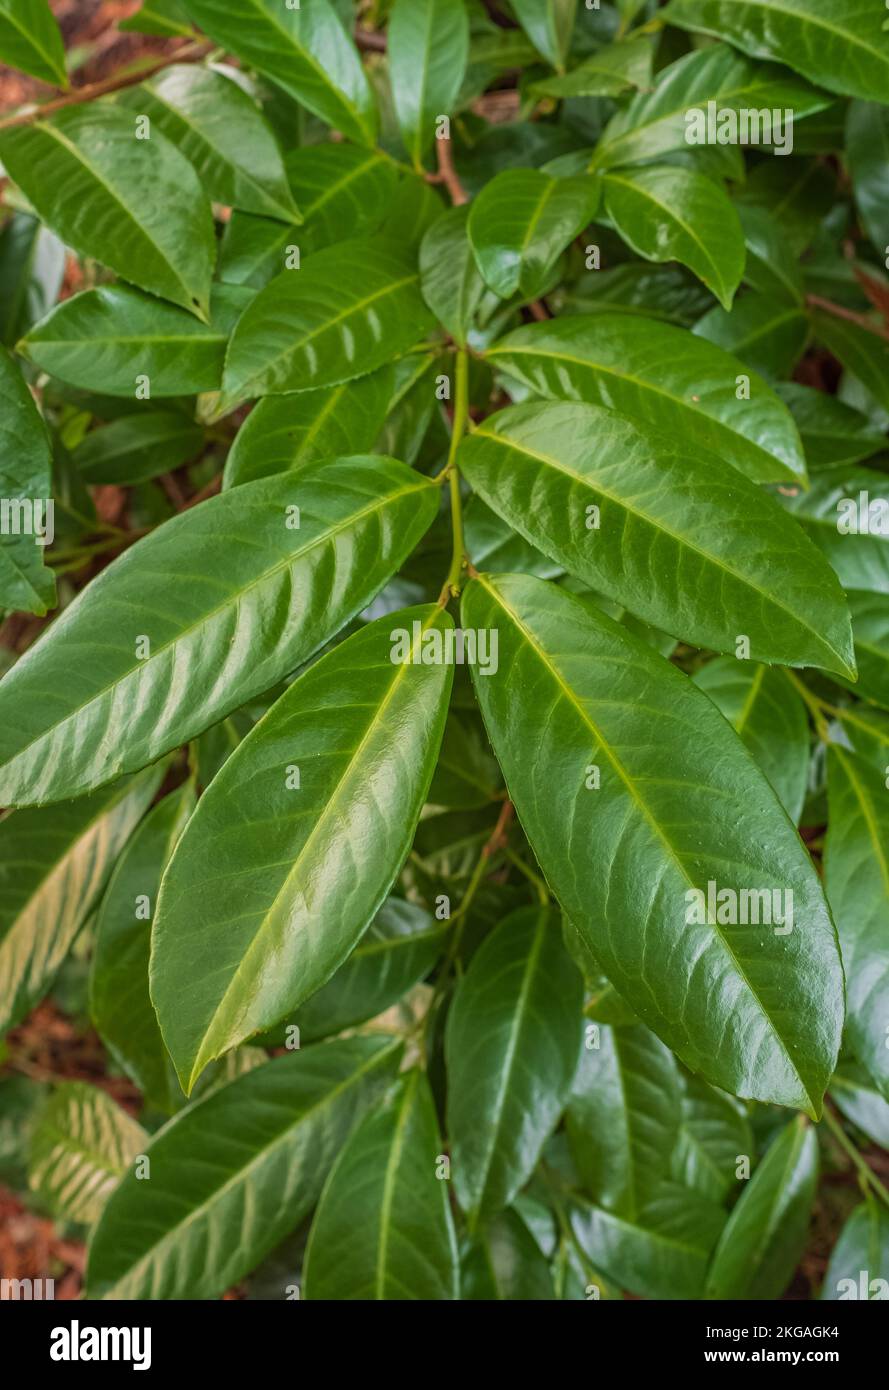 Close up of cherry laurel leaves. Evergreen cherry laurel plant as a natural background. Prunus laurocerasus, English laurel in North America, is an e Stock Photo